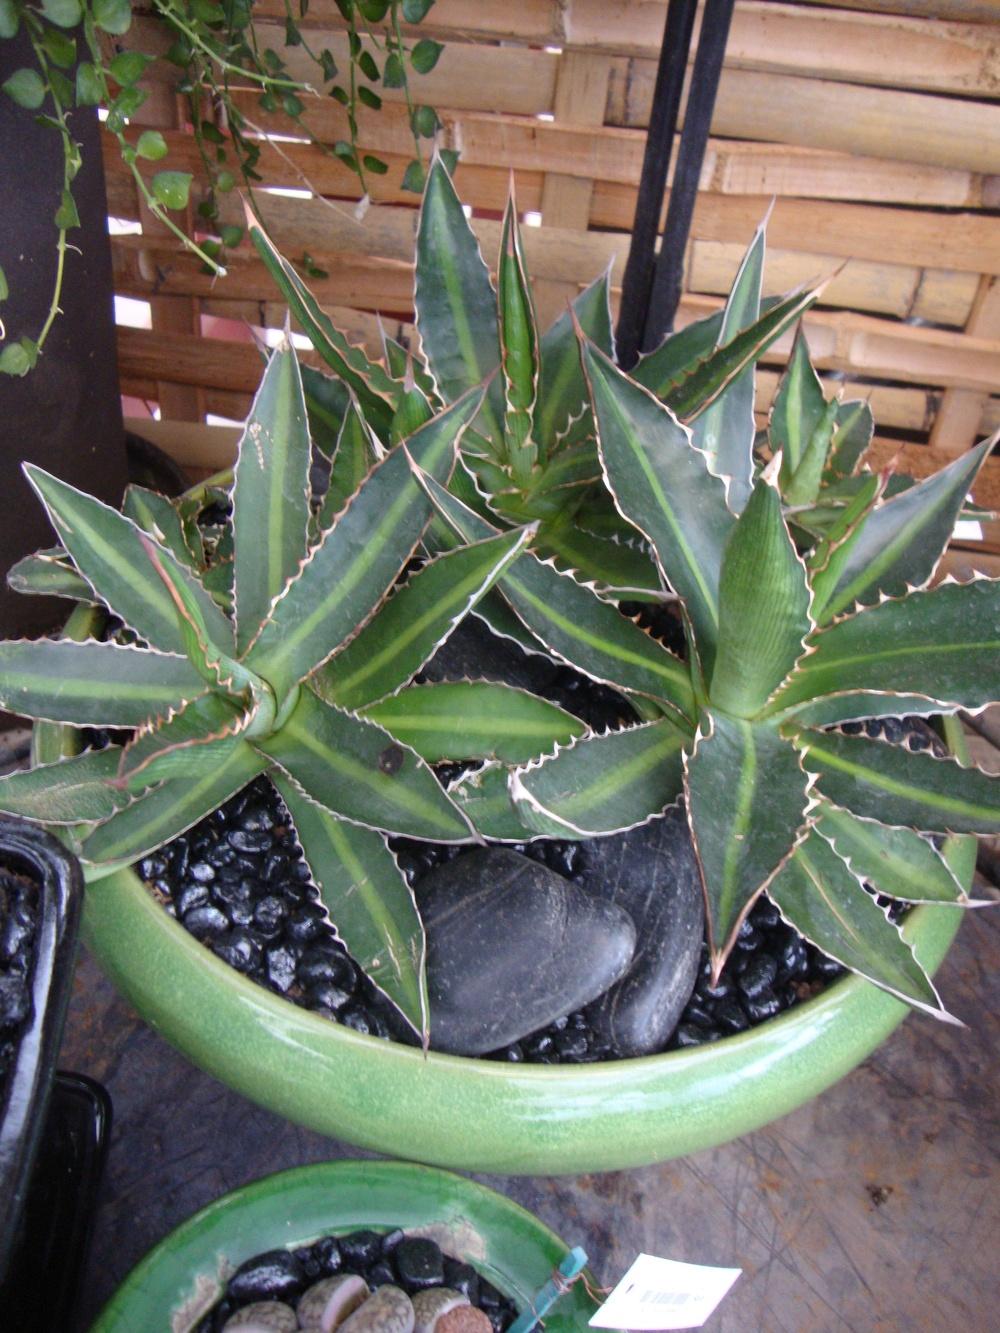 Photo of Agaves (Agave) uploaded by Paul2032